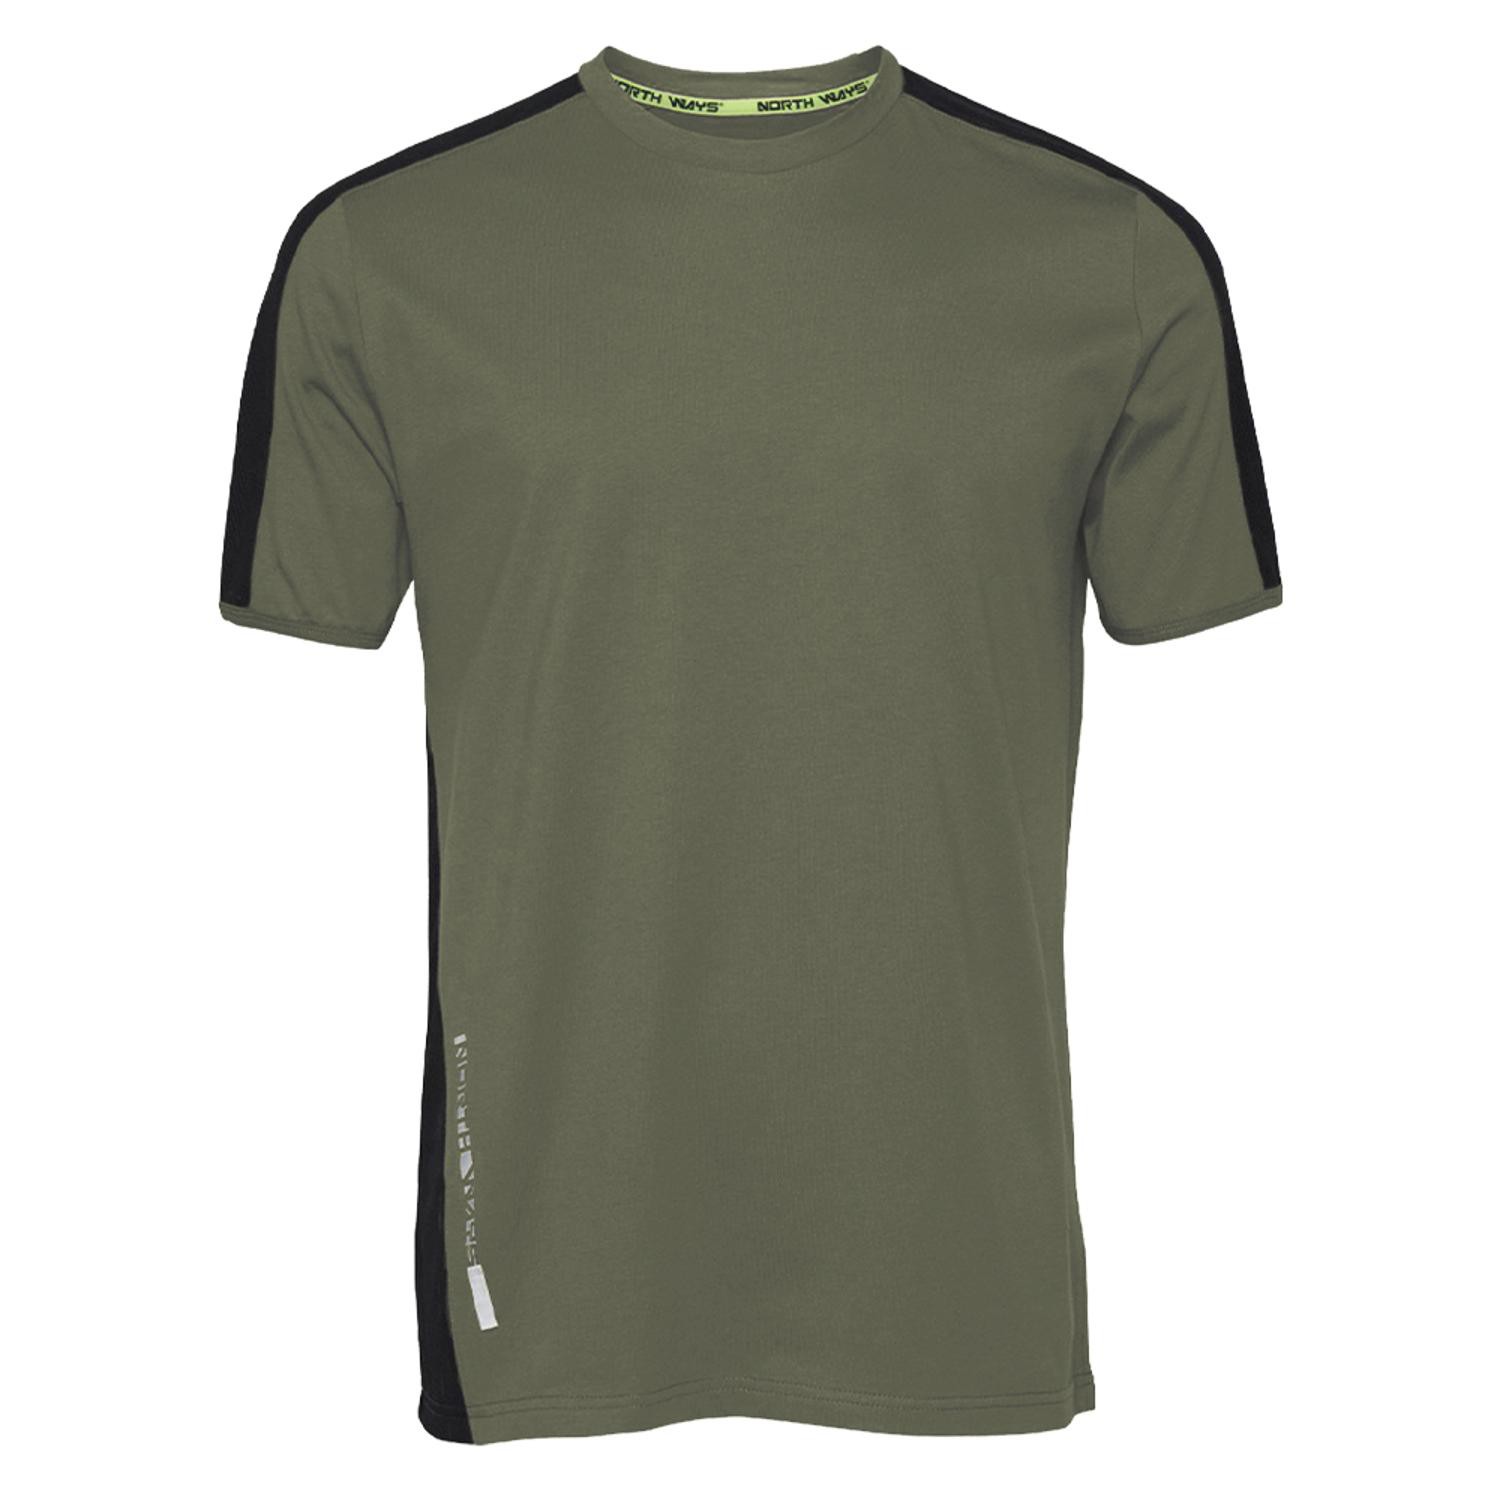 Tee shirt manches courtes contraste Andy North Ways vert vue 2 cotepro.fr